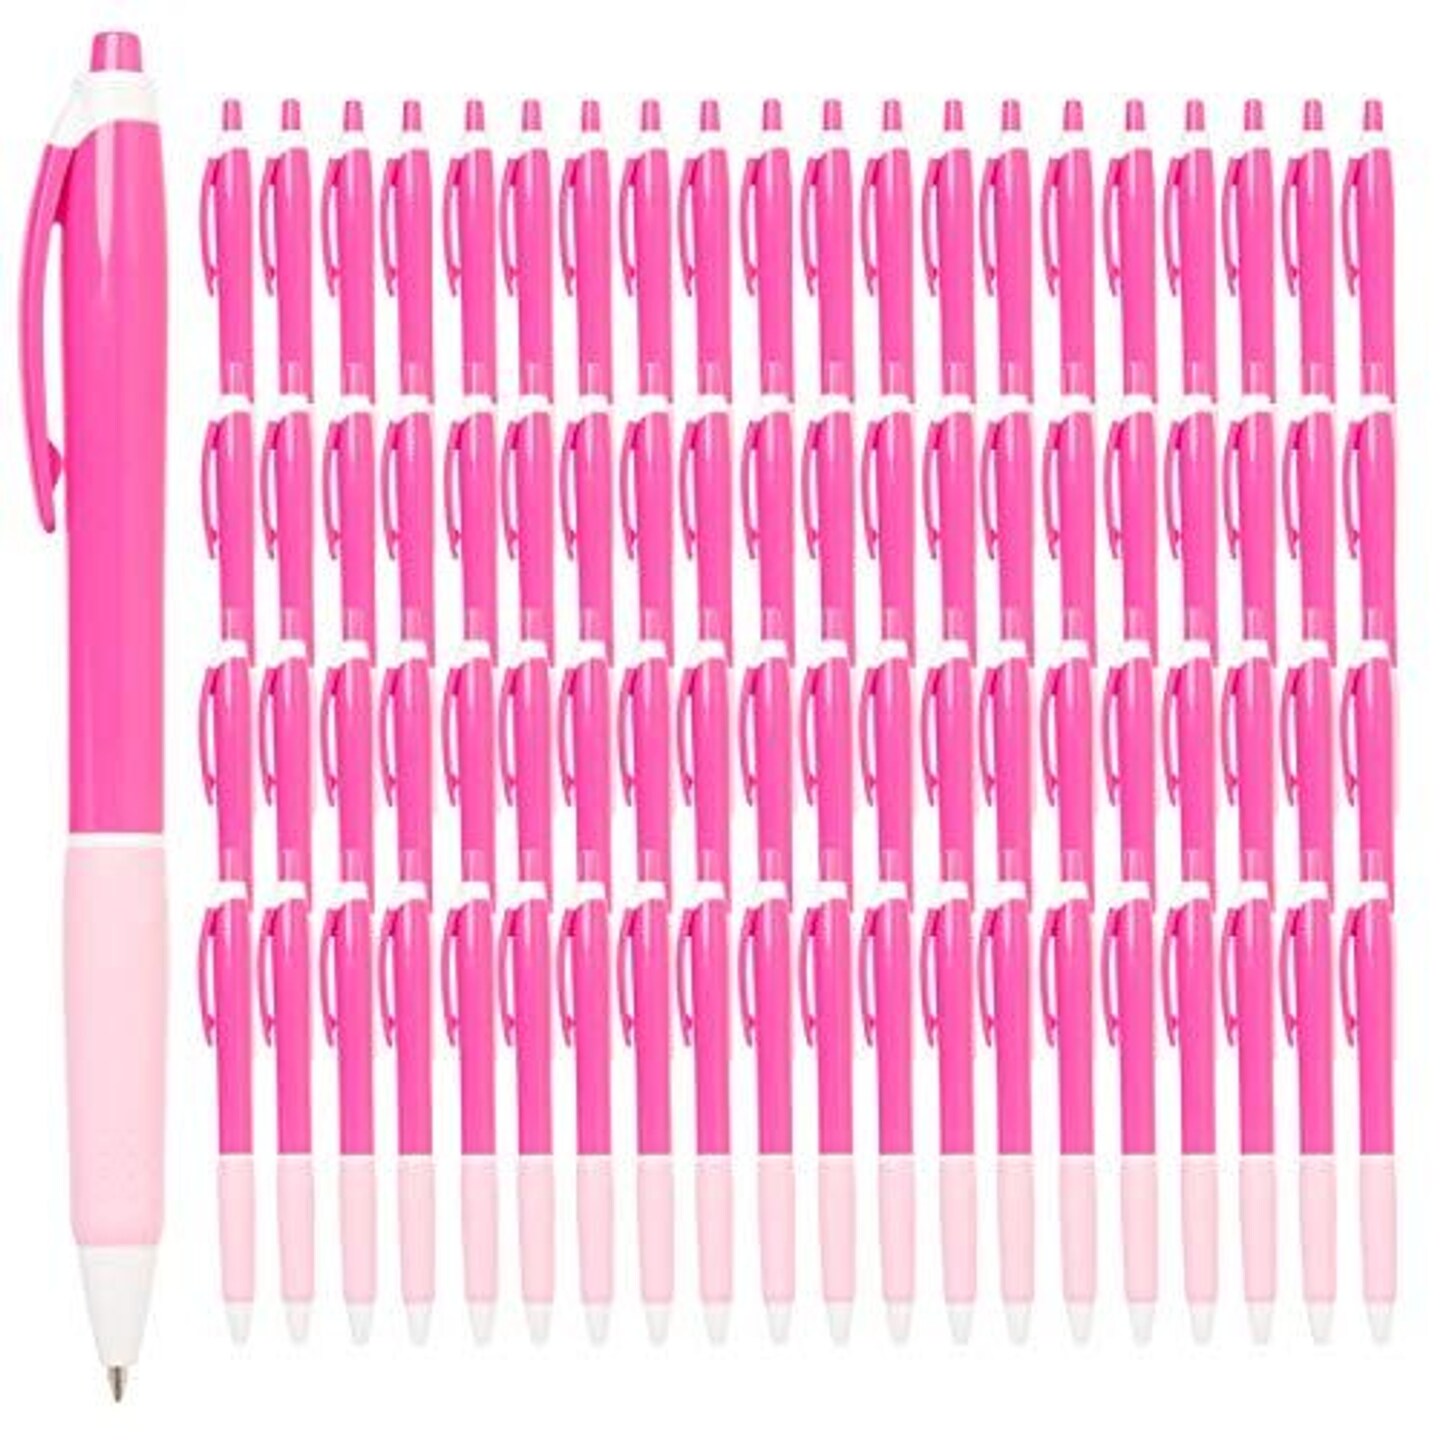 Simply Genius Pens in Bulk - 100 pack of Office Pens - Retractable Ballpoint Pens in Black Ink - Great for Schools, Notebooks, Journals &#x26; More (Pink, 100pcs)